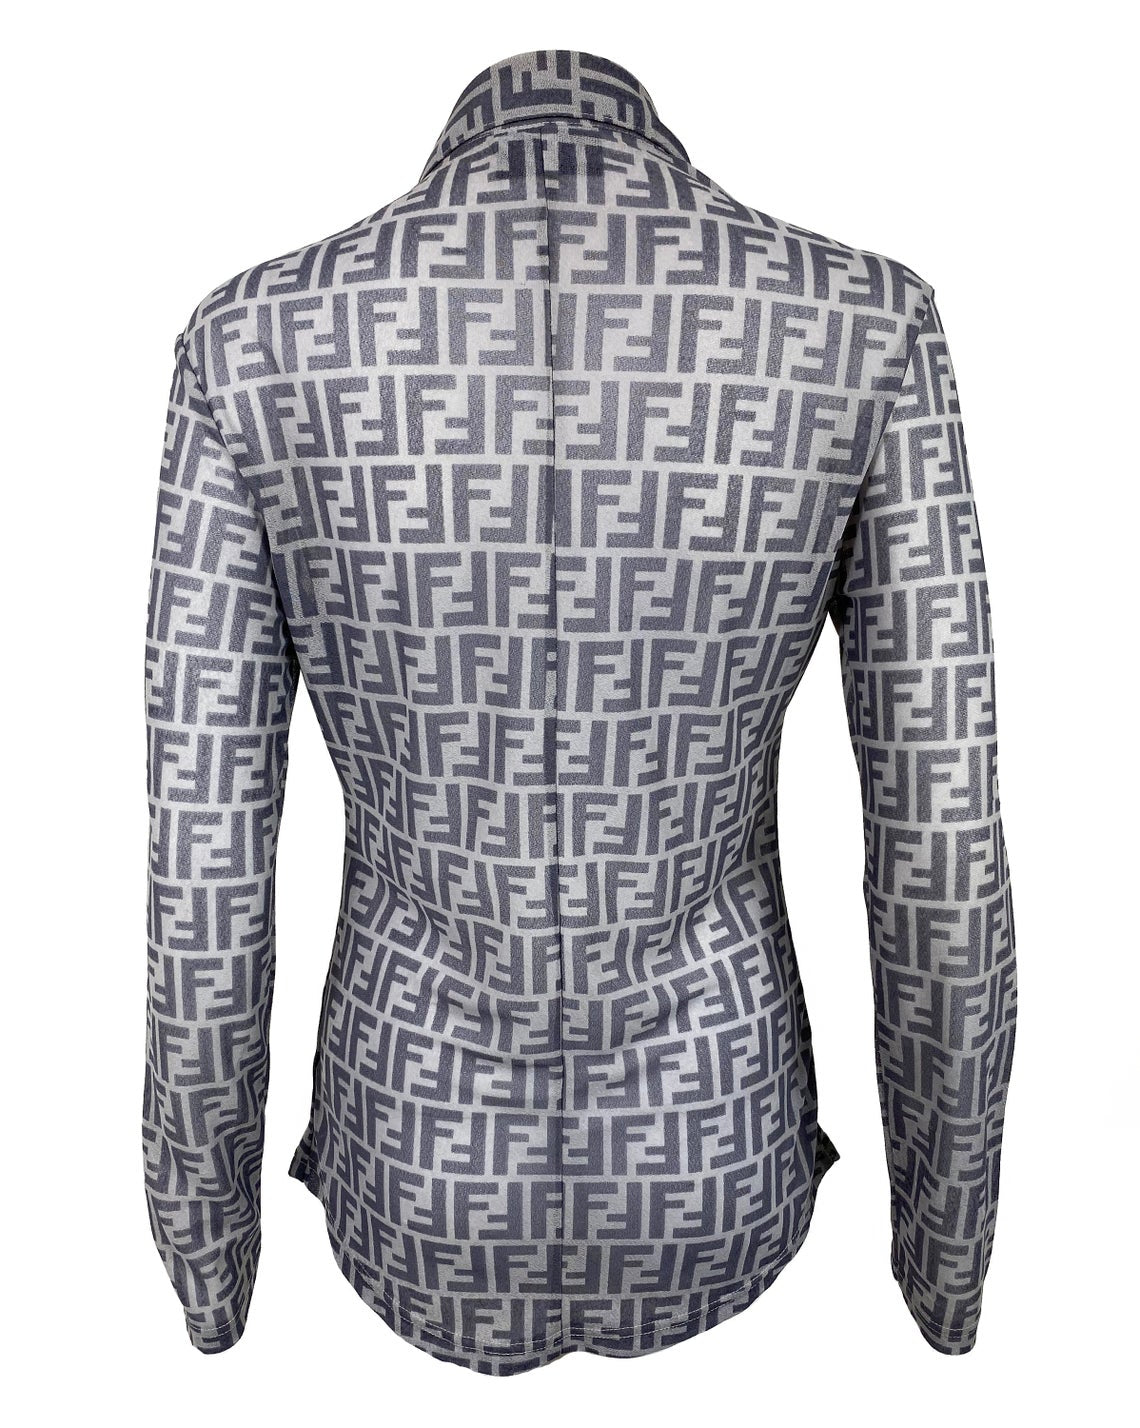 FRUIT Vintage Fendi Zucca print button up shirt dating to the early 90s. This amazing piece is made from a sheer mesh and features a bold Fendi Zucca print in two tone grey.